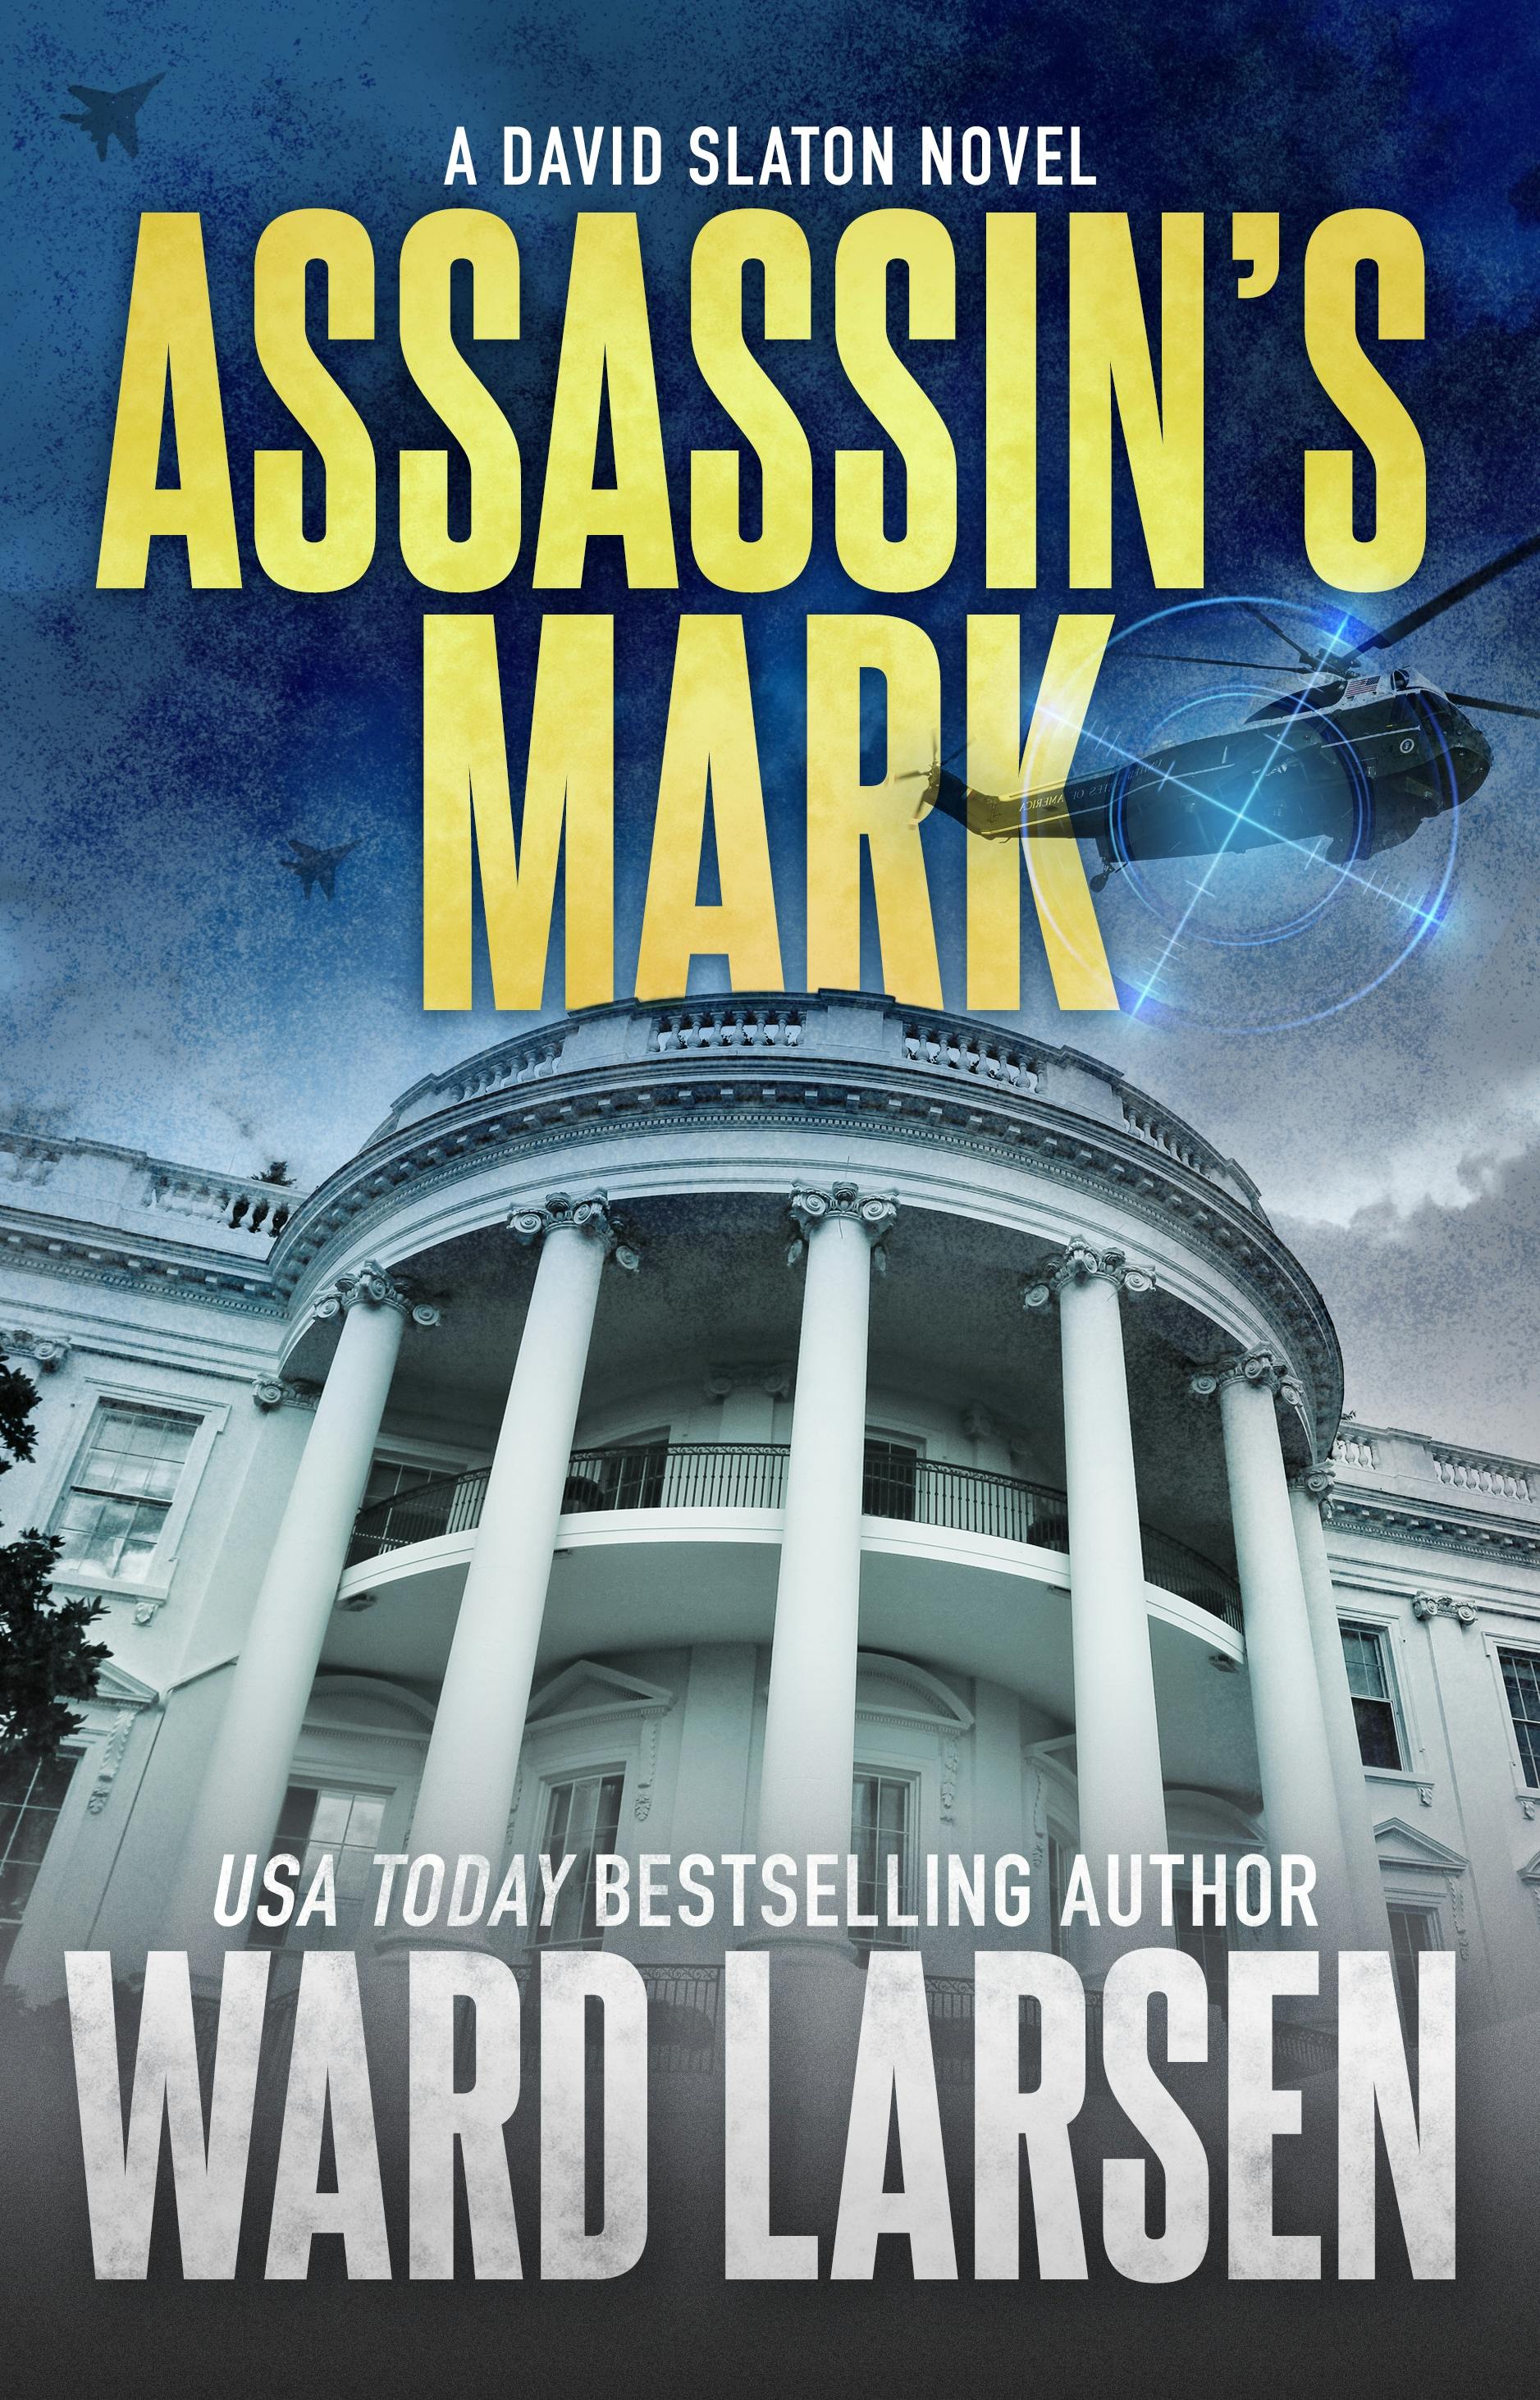 Cover for the book titled as: Assassin's Mark